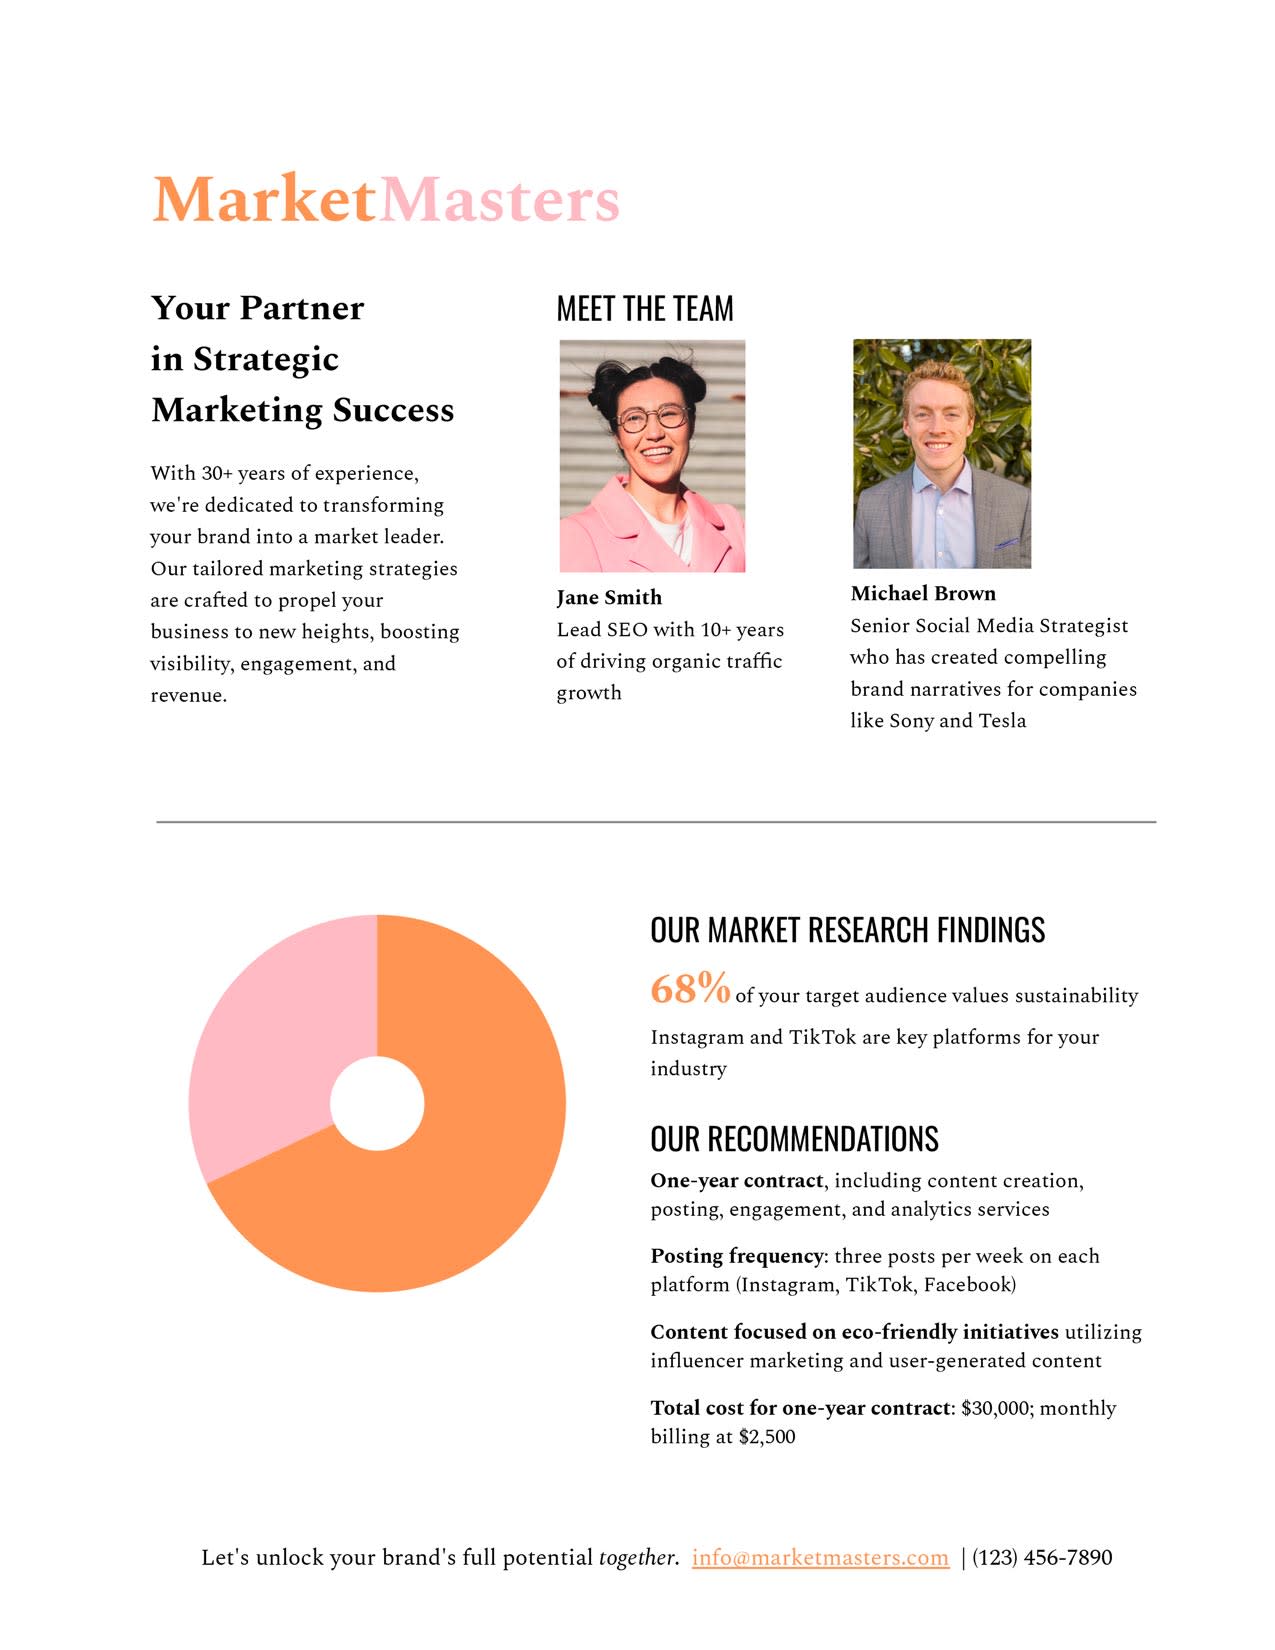 Example of a pitch presentation one-pager including market research summary, team details and asks